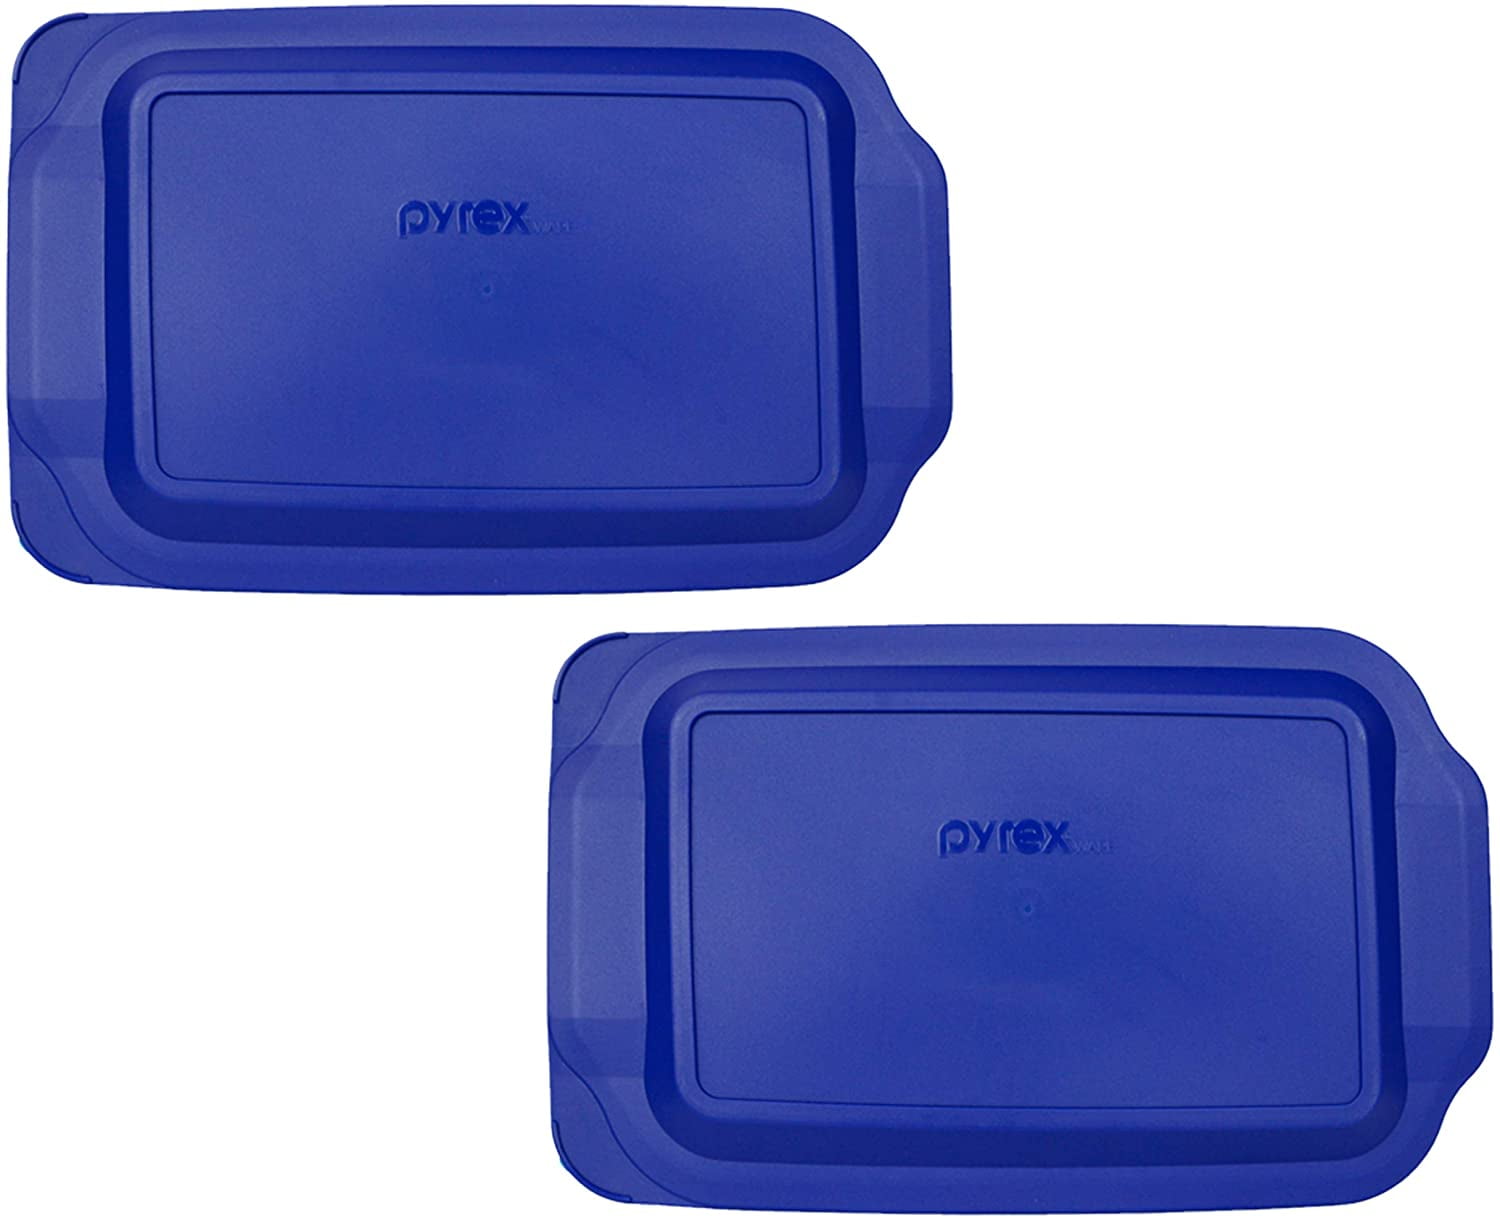 Pyrex Cook & Store Food Set of 2 Rectangular Roaster Candy Dish with Plastic Lid 